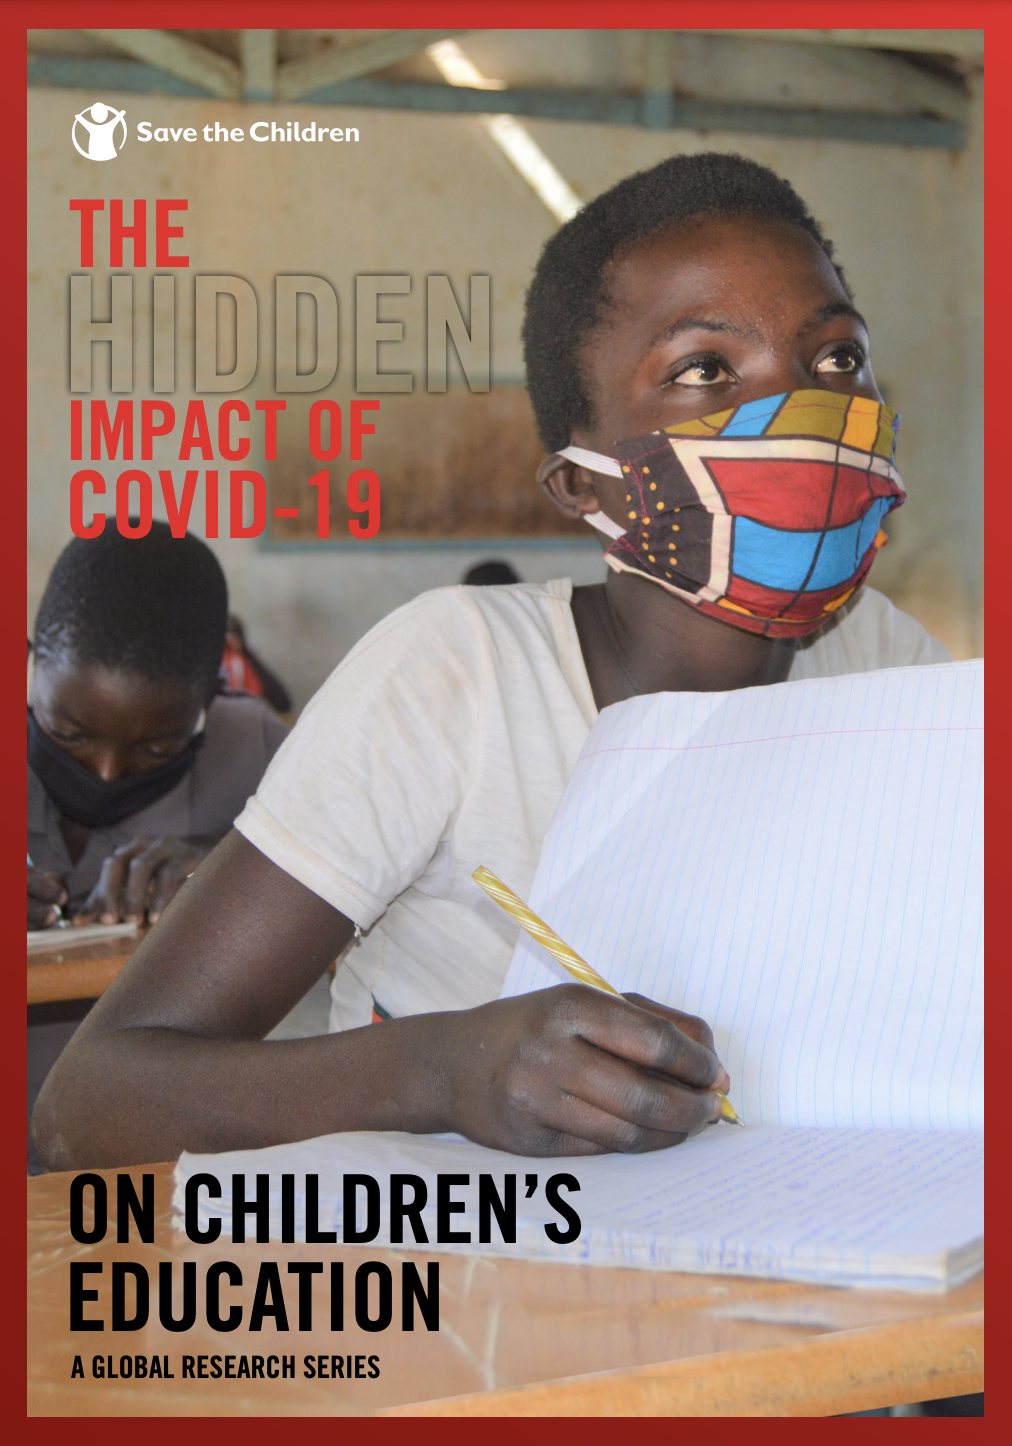 The Hidden Impact of COVID-19 on Children’s Education